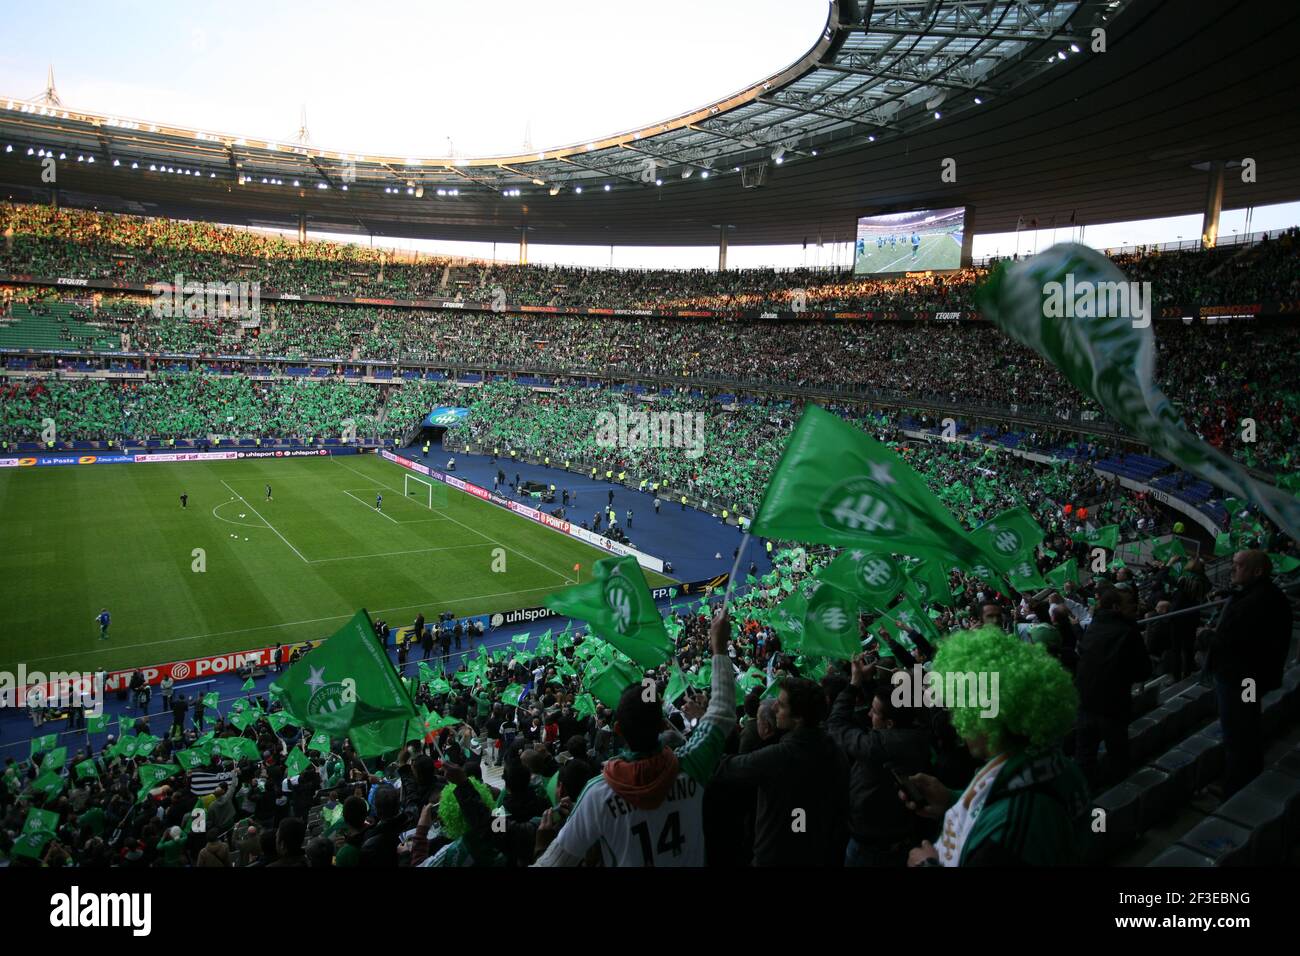 FOOTBALL - FRENCH LEAGUE CUP 2012/2013 - FINAL - AS SAINT ETIENNE v STADE RENNAIS - 20/04/2013 - SAINT DENIS (FRA) - PHOTO DIDIER RAVON / DPPI - FANS SAINT ETIENNE IN STAND OF STADE DE FRANCE DURING THE MATCH Stock Photo